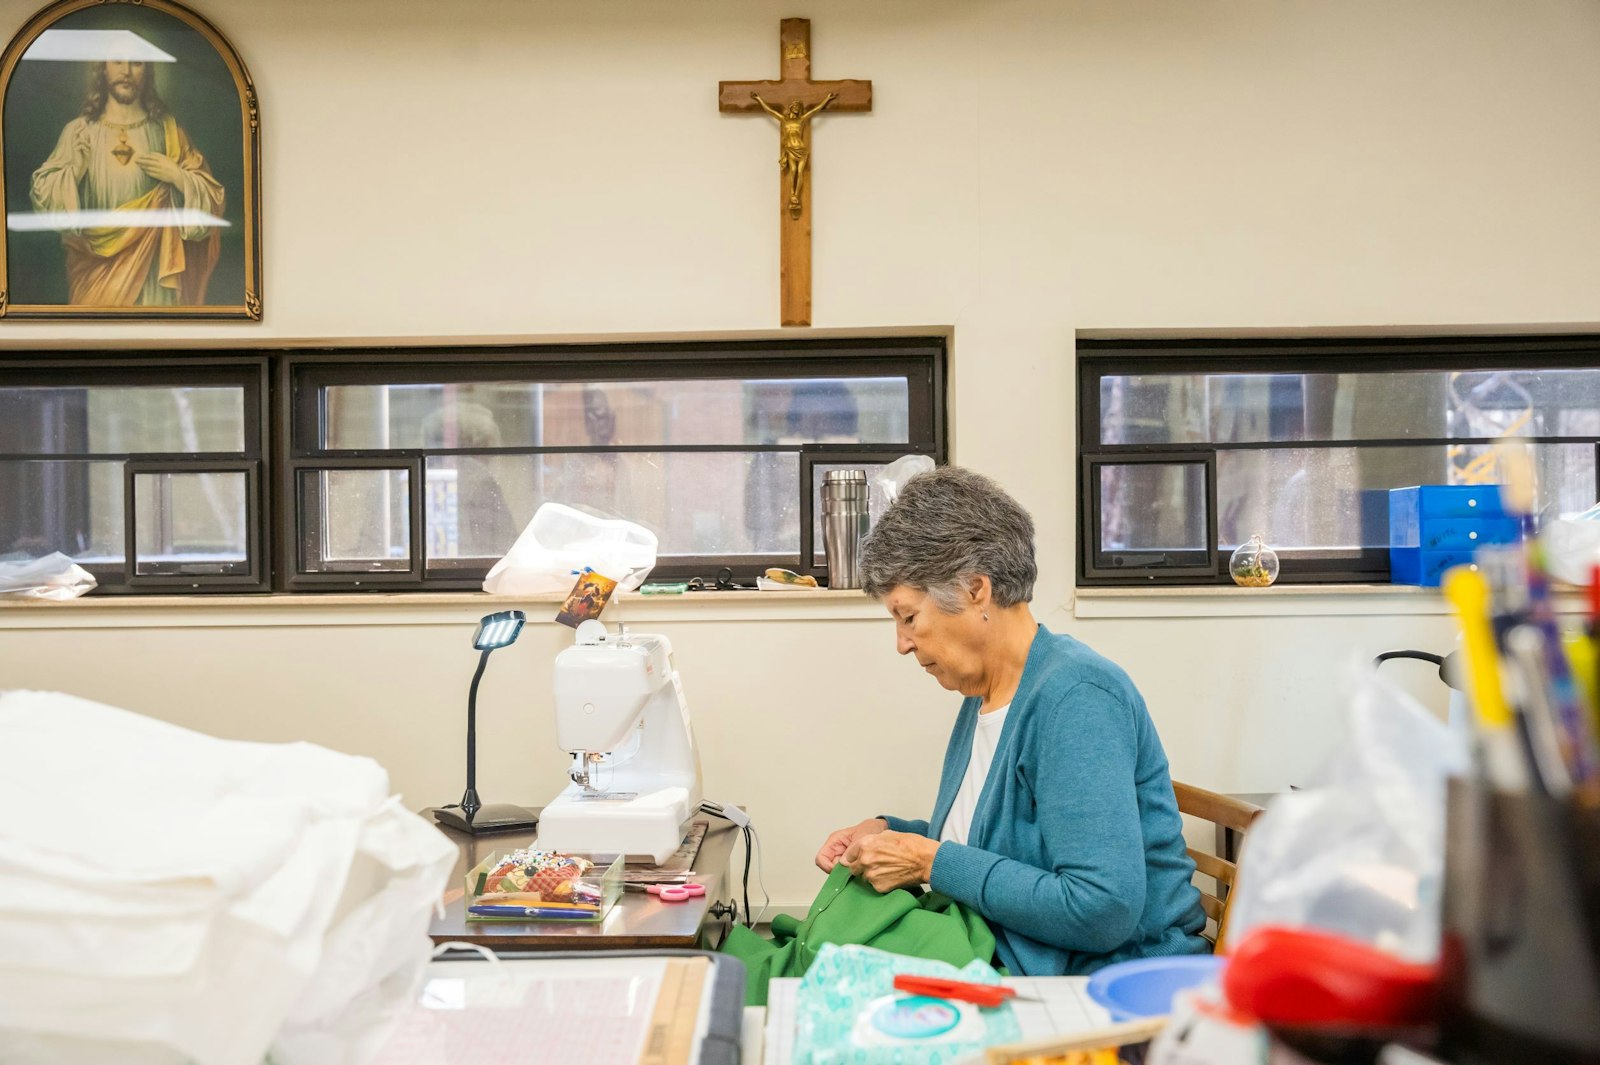 Madeline Balice sews a chausible in the sewing room at St. Bonaventure Monastery. The century-old Eucharistic Mission Band, which started in Detroit in 1917, has seen membership ebb and flow over the years. Currently, six women meet weekly to sew vestments, but occasionally complete special order projects for the Capuchins.